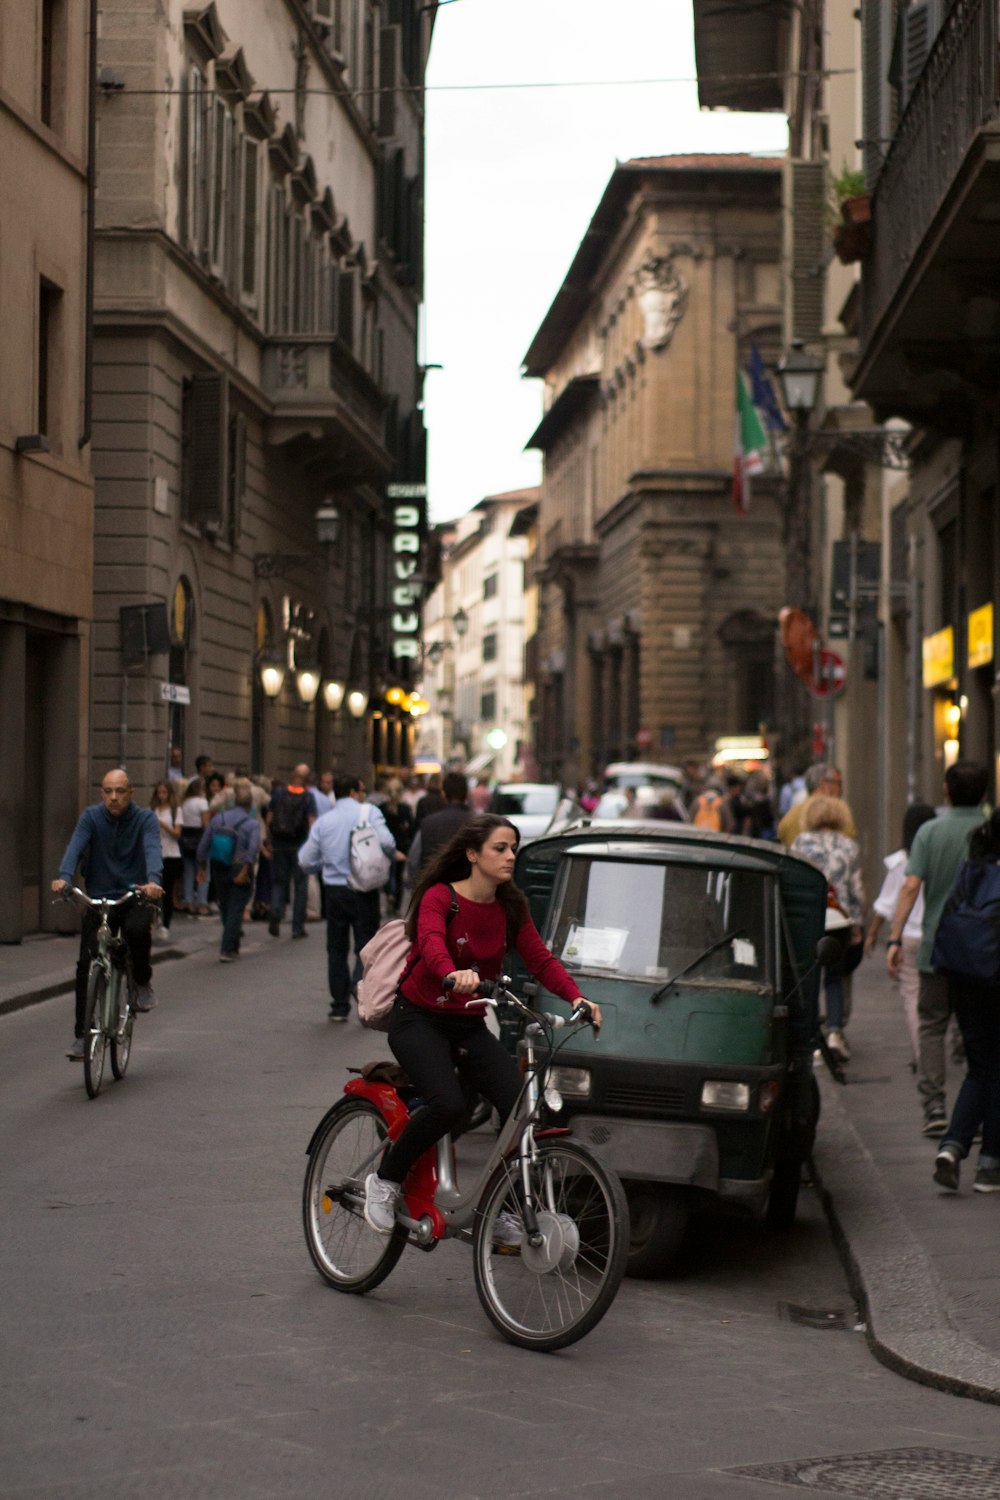 people riding bicycles on street during daytime